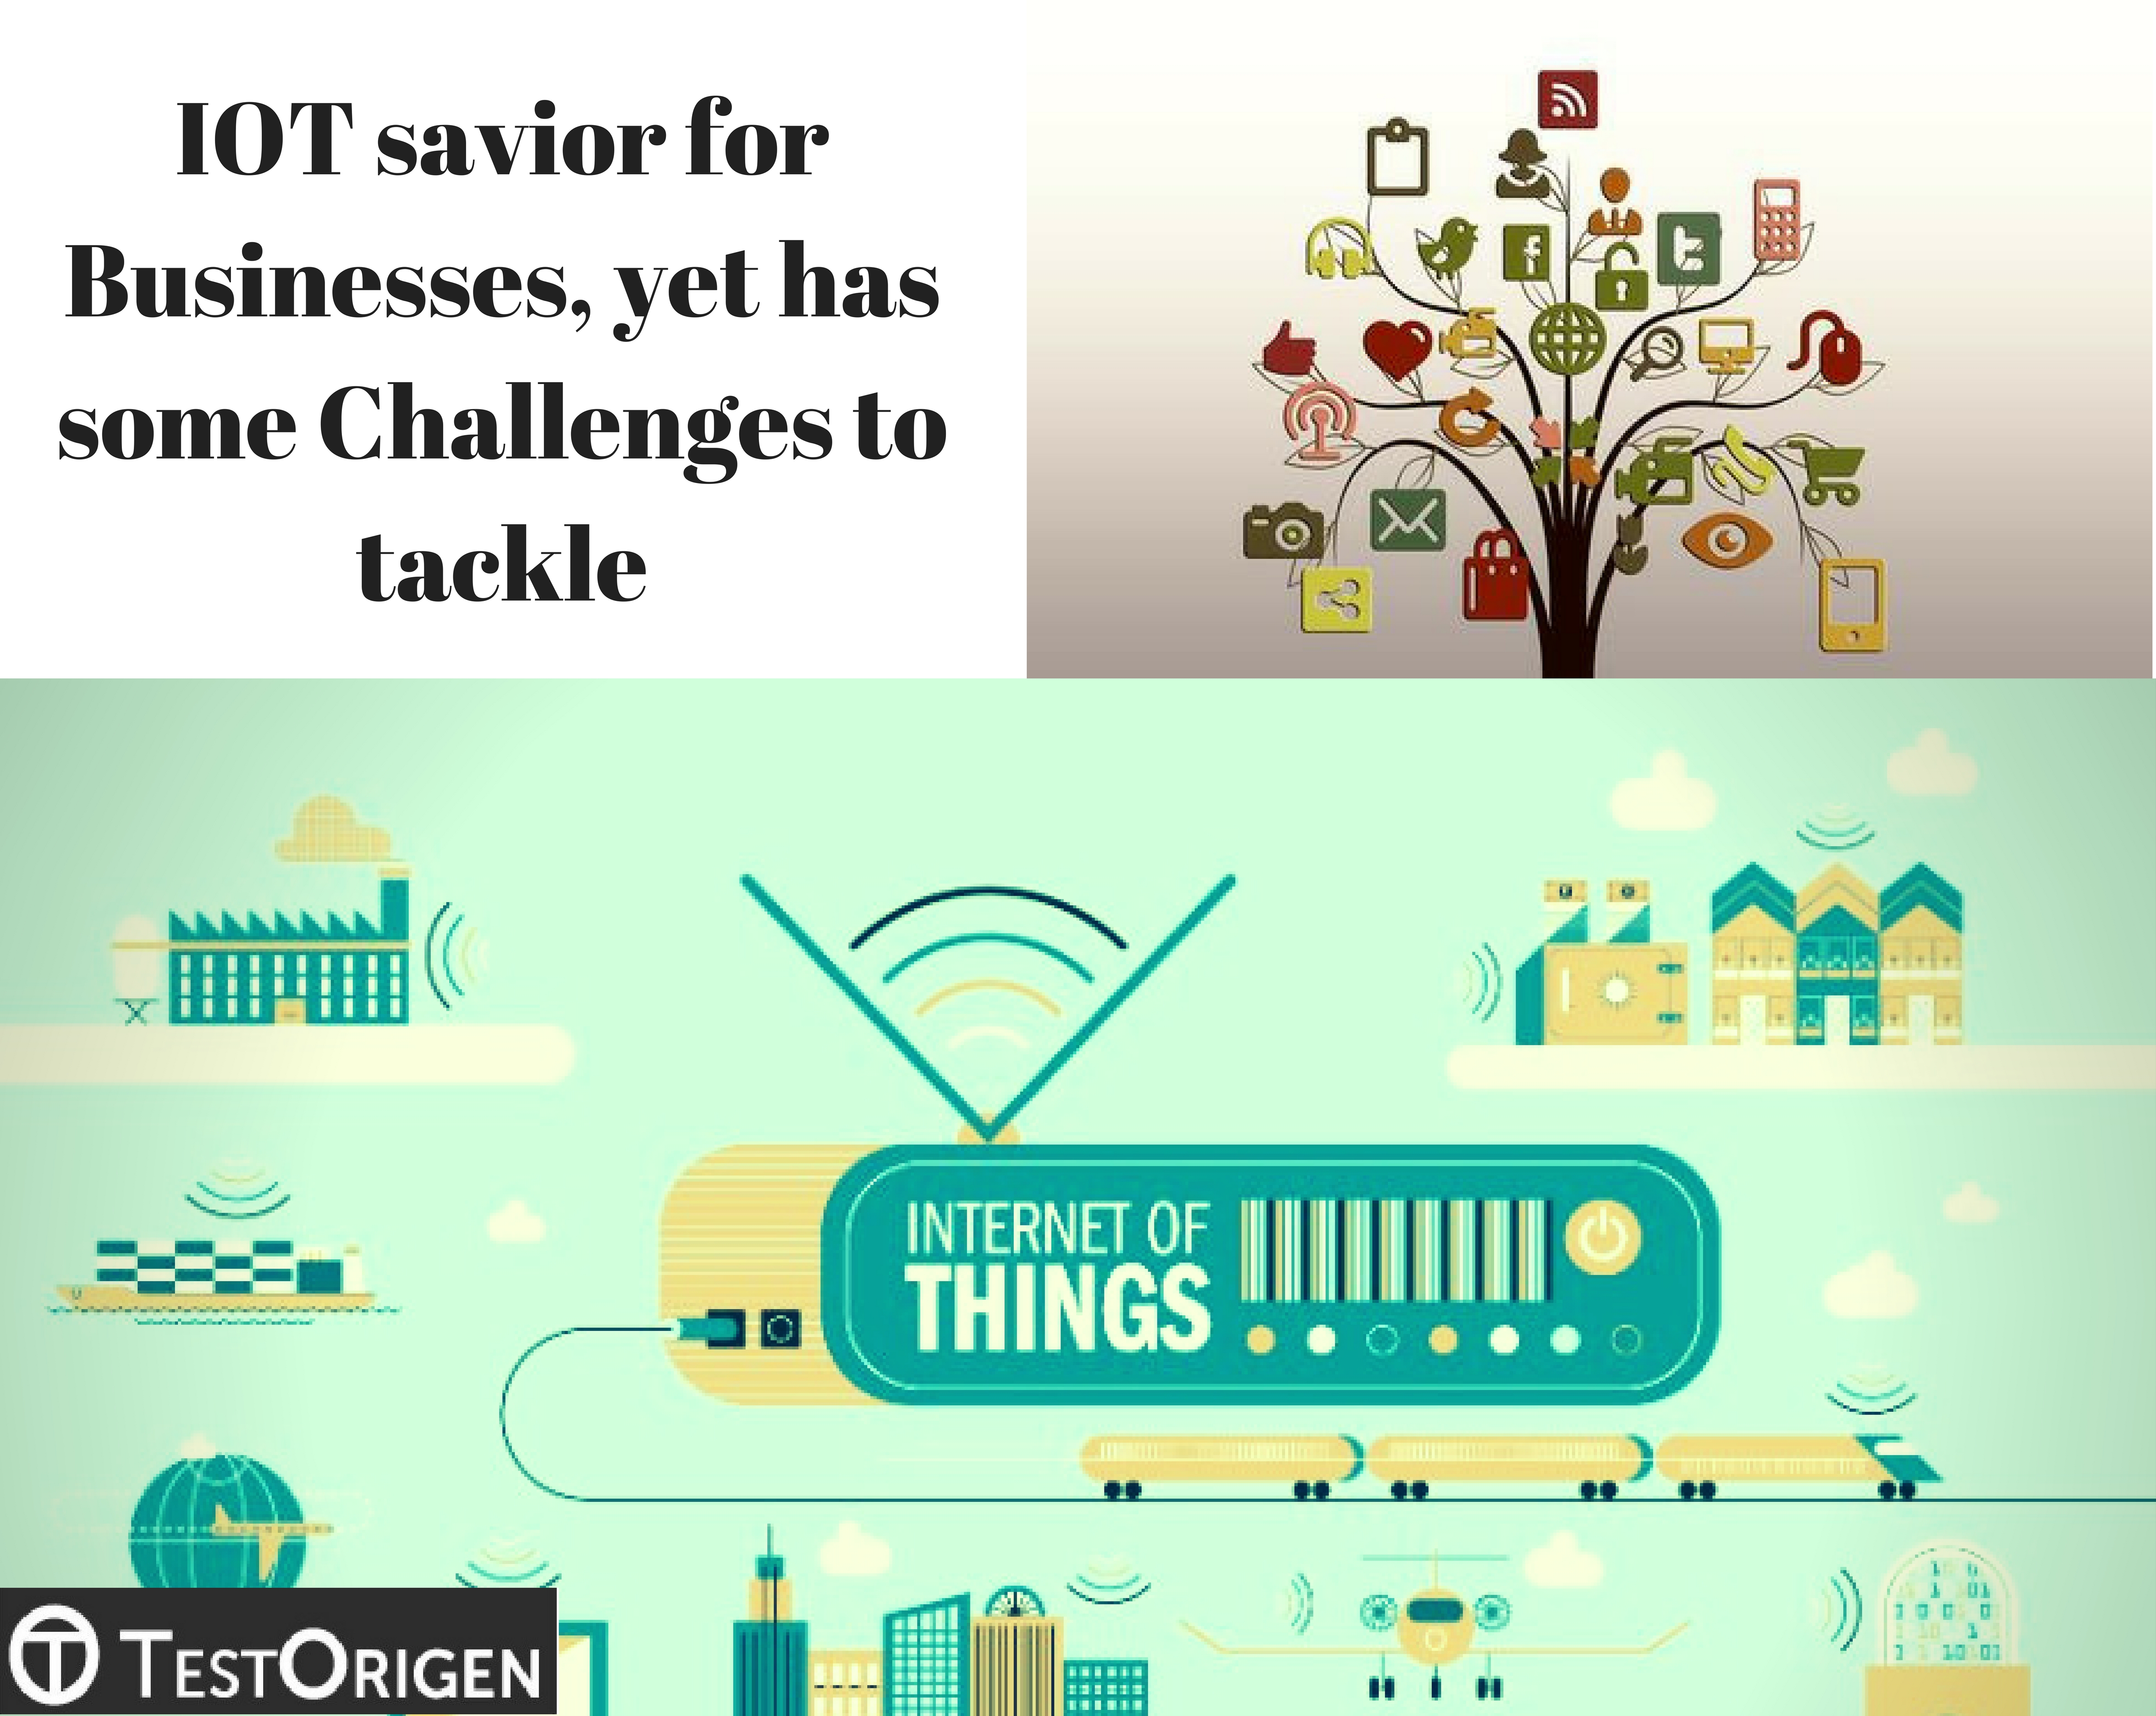 IOT savior for Businesses, yet has some Challenges to tackle